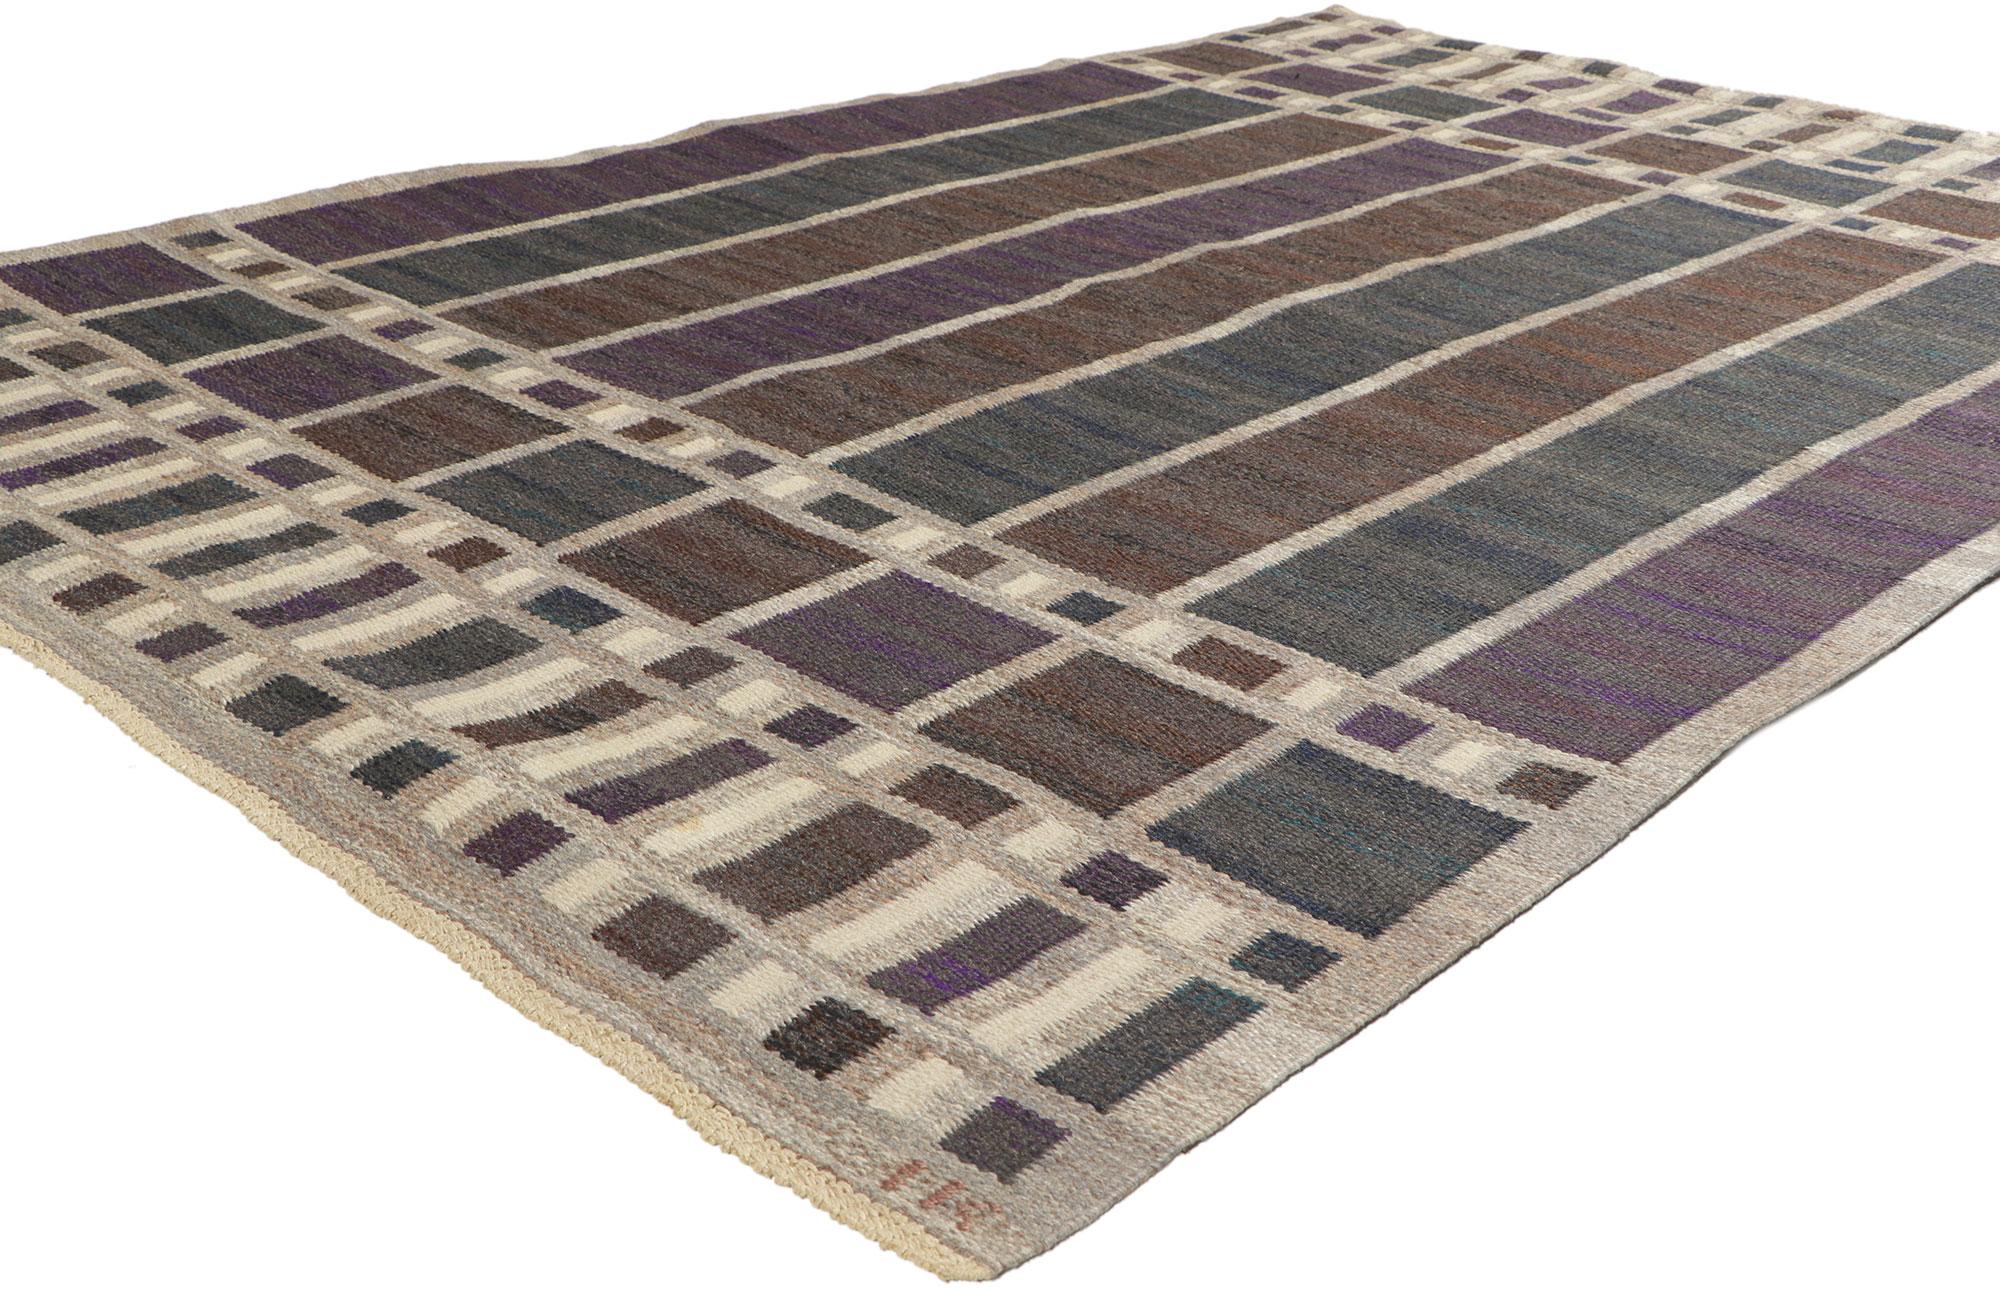 78482 Vintage Swedish Kilim Rug Rollakan, 04'10 x 07'03. ?Emanating Scandinavian modern style with incredible detail and texture, this vintage Swedish rollakan rug is a captivating vision of woven beauty. The eye-catching geometric design and earthy